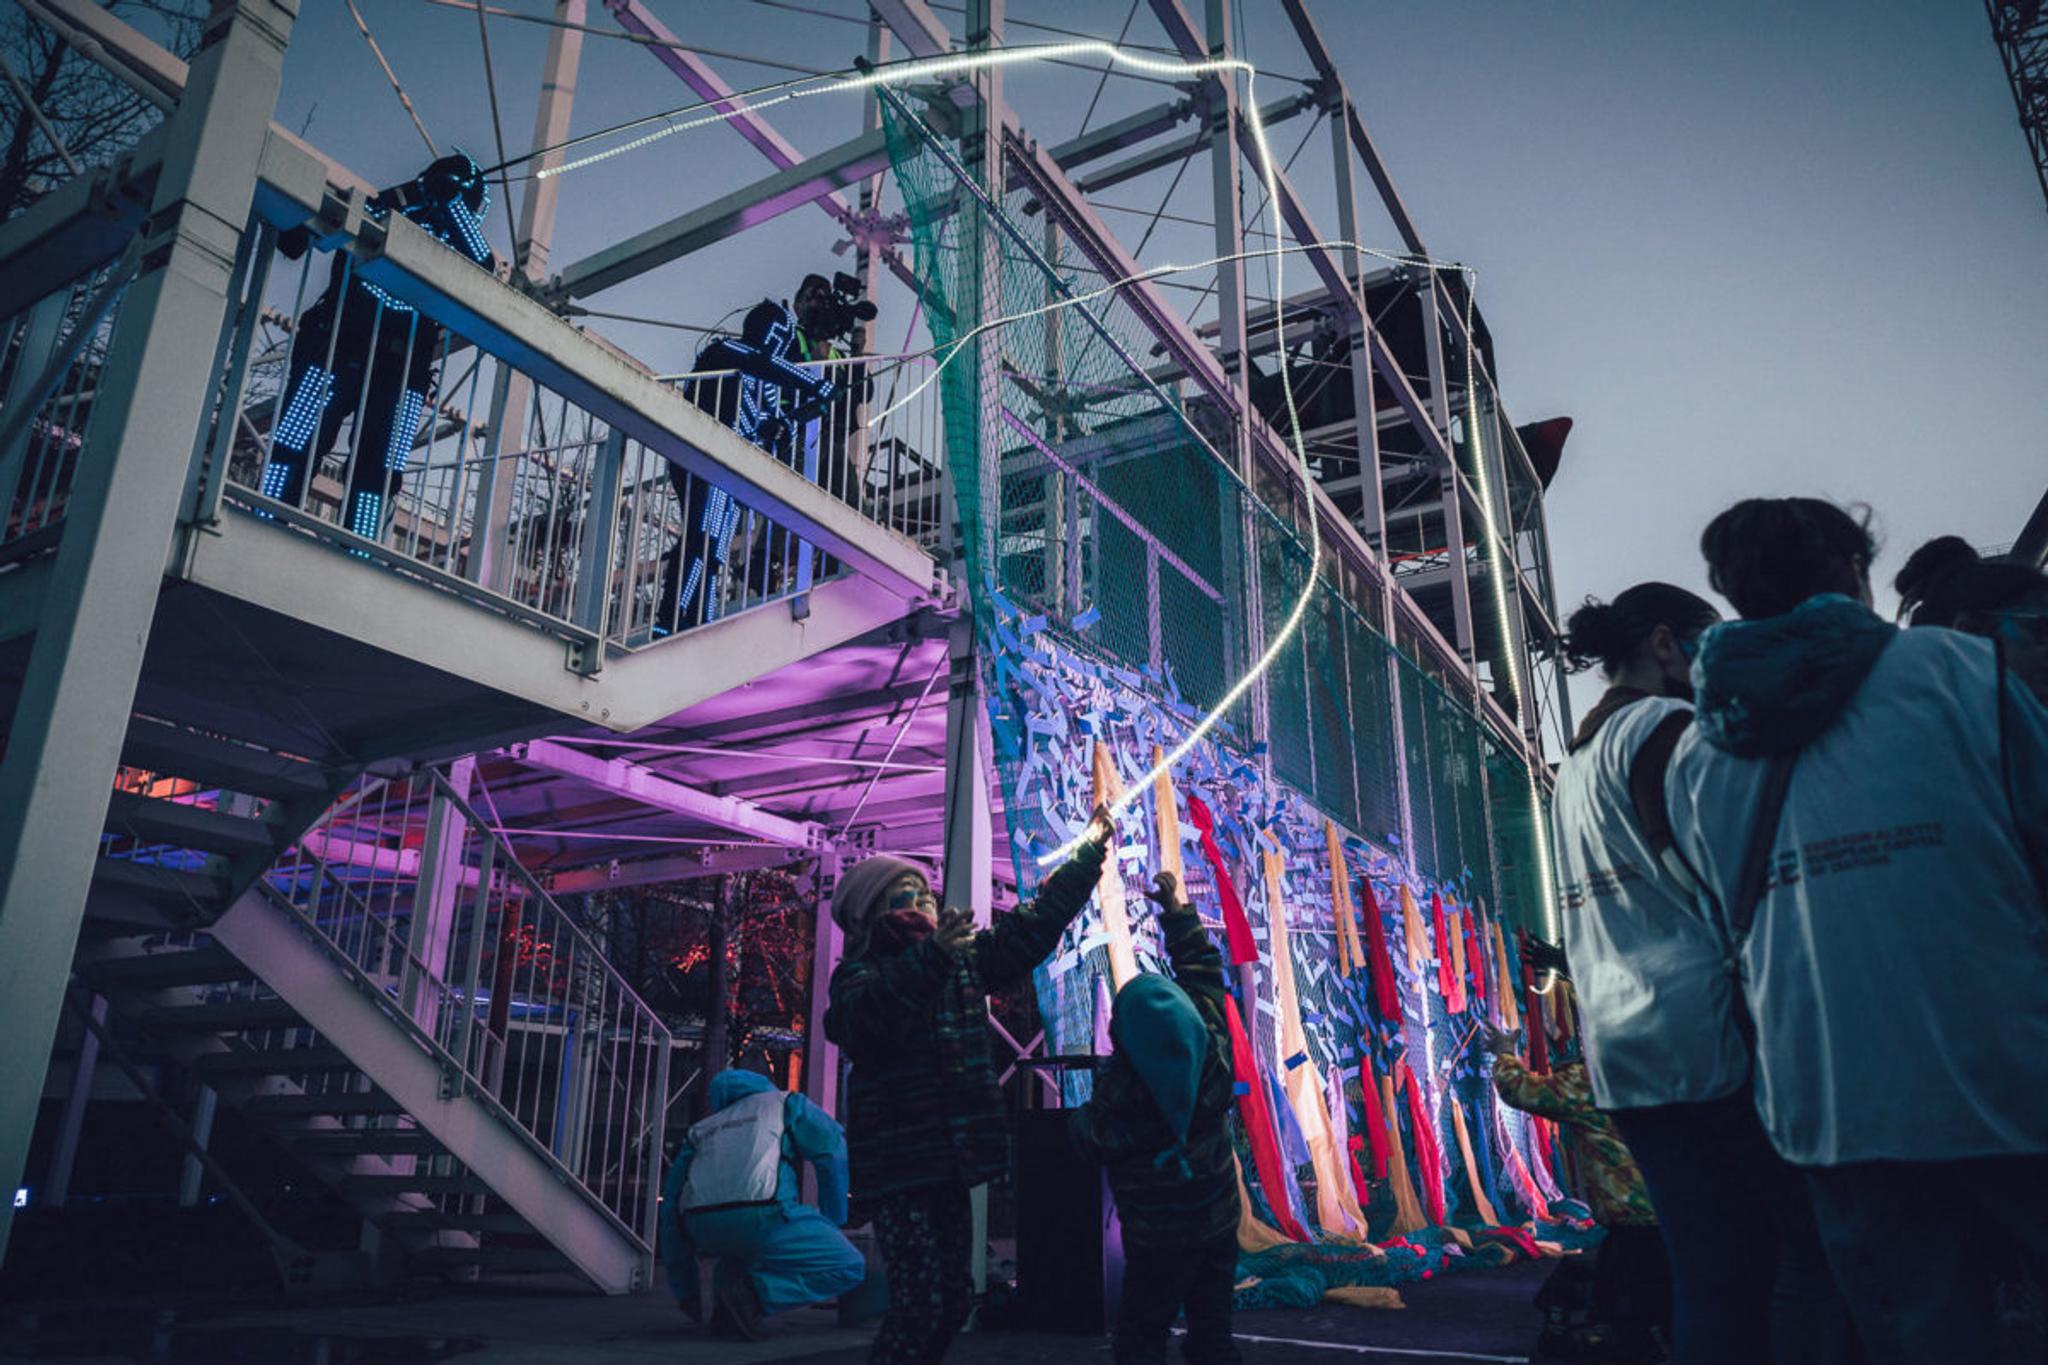 On metal scaffolding, two performers in LED suits cast two white, glowing LED fishing rods down to 2 children who excitedly play with them. A group in white hi-vis vests is in the corner- it's dusk.